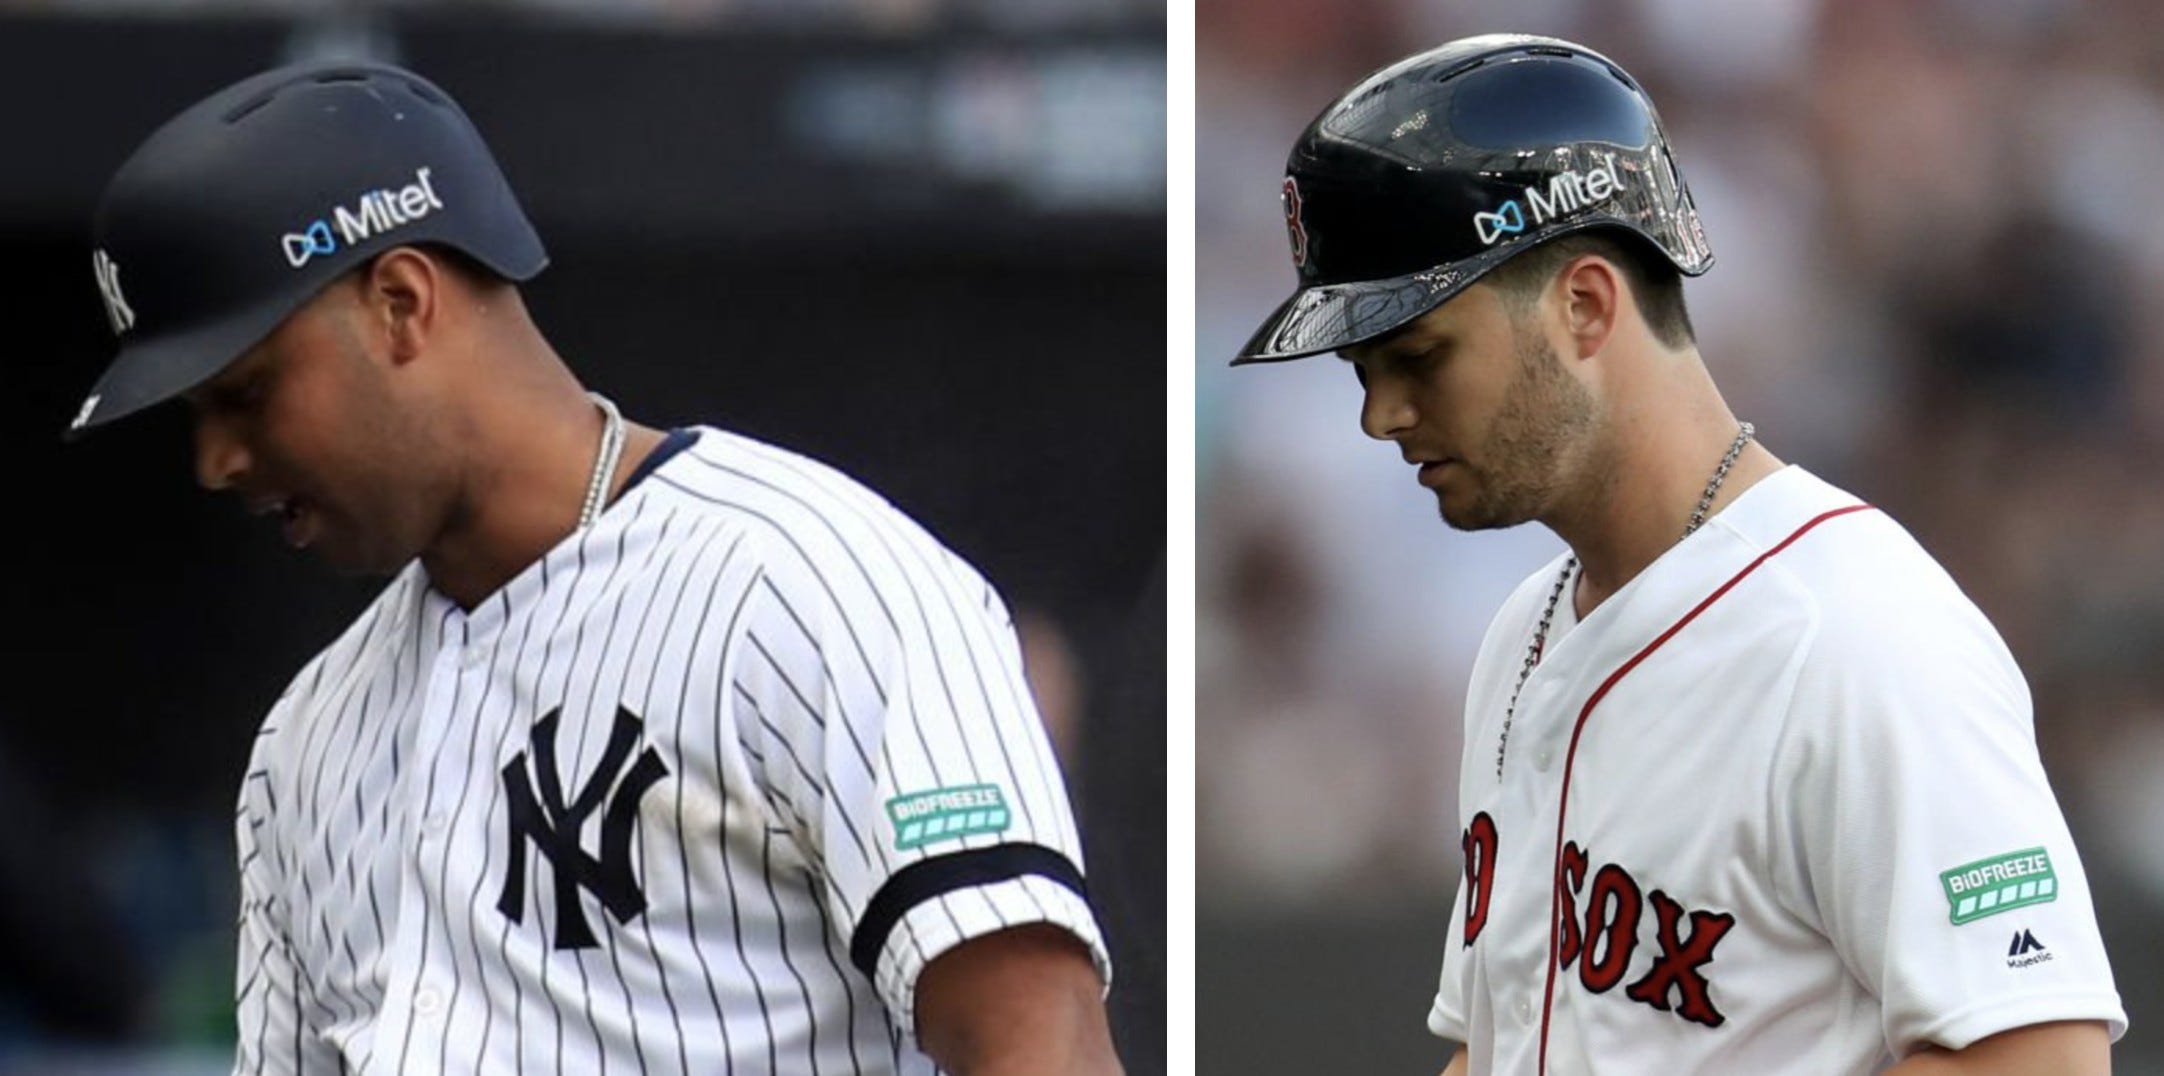 Yankees, Red Sox Both Wear White and Ads on Uniforms in London